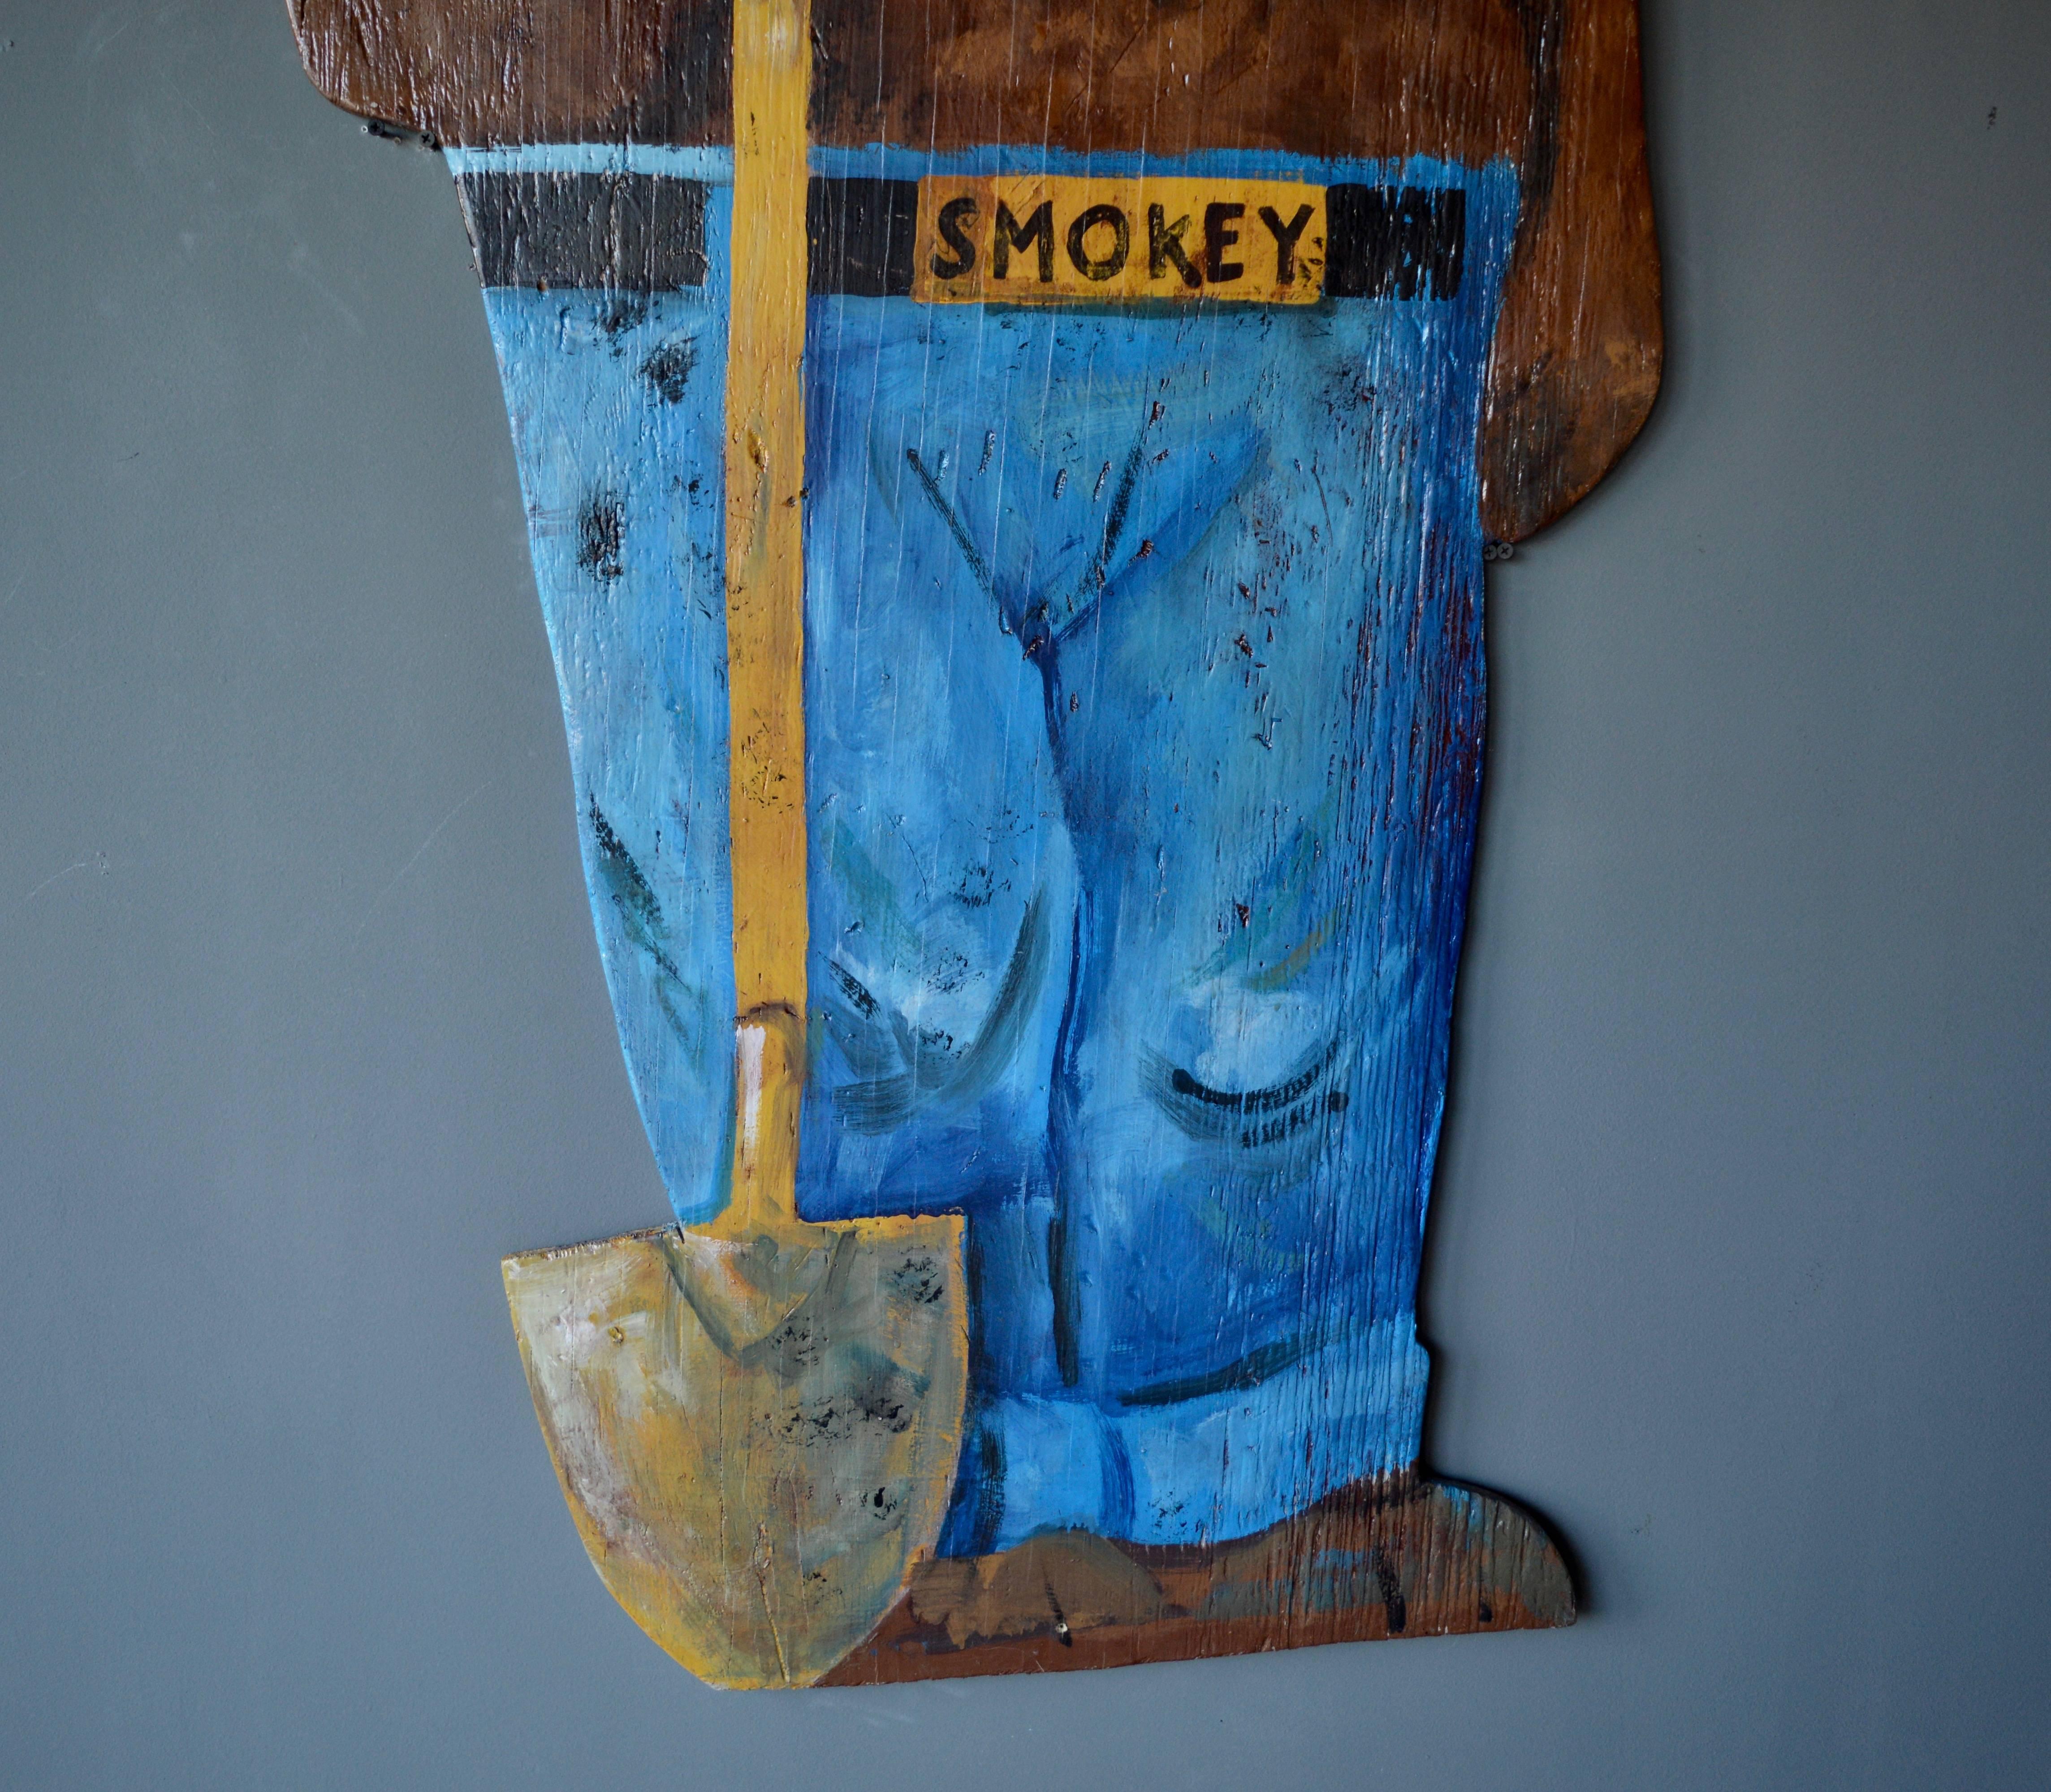 smokey the bear statue for sale